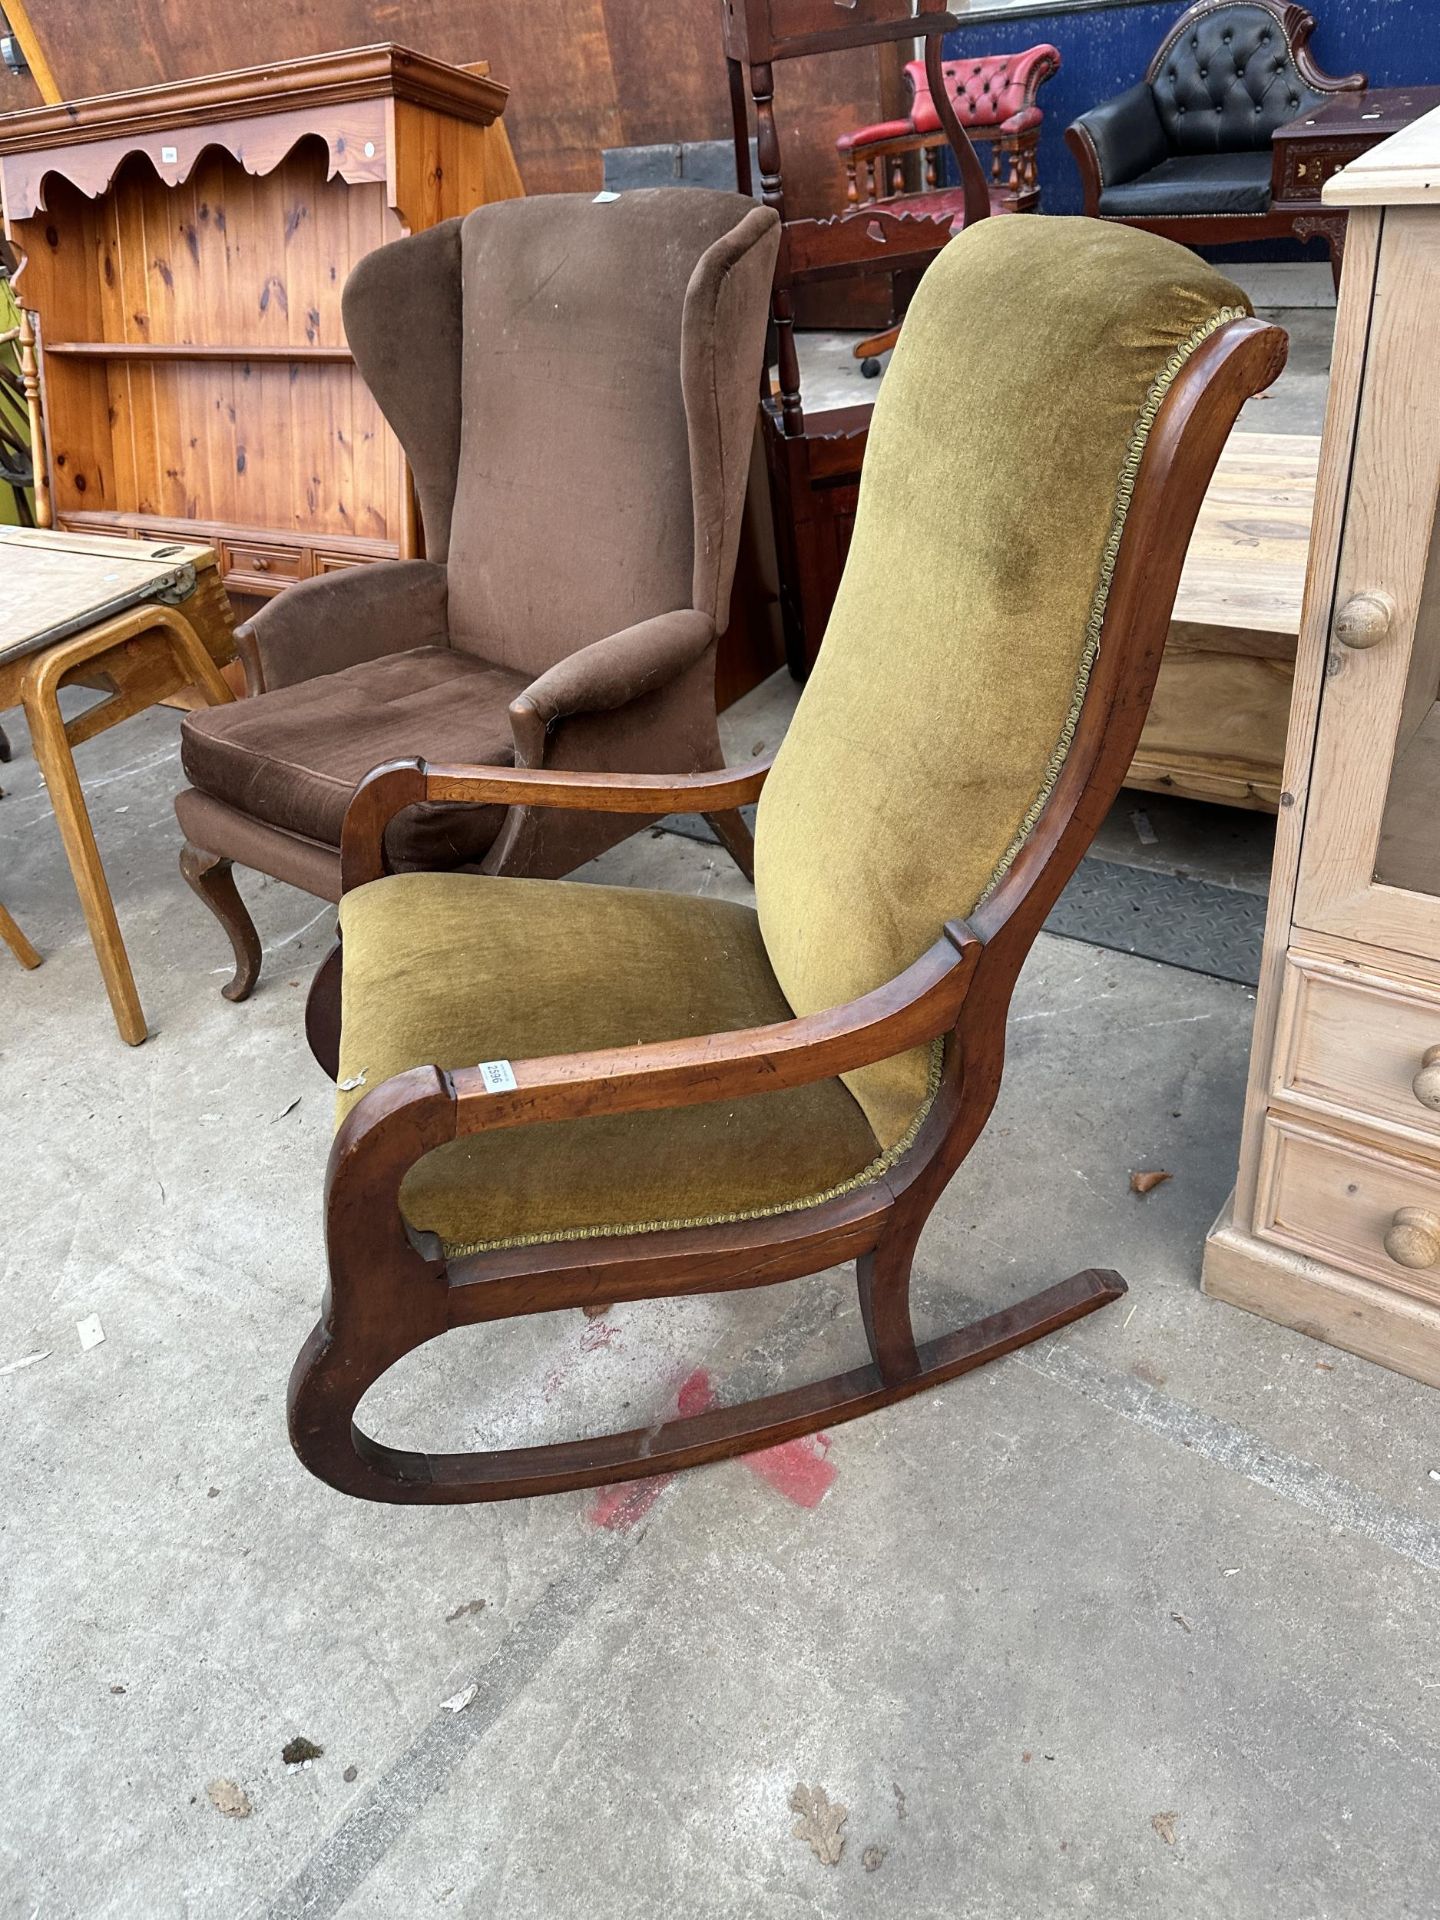 A VICTORIAN MAHOGANY ROCKING CHAIR - Image 4 of 4